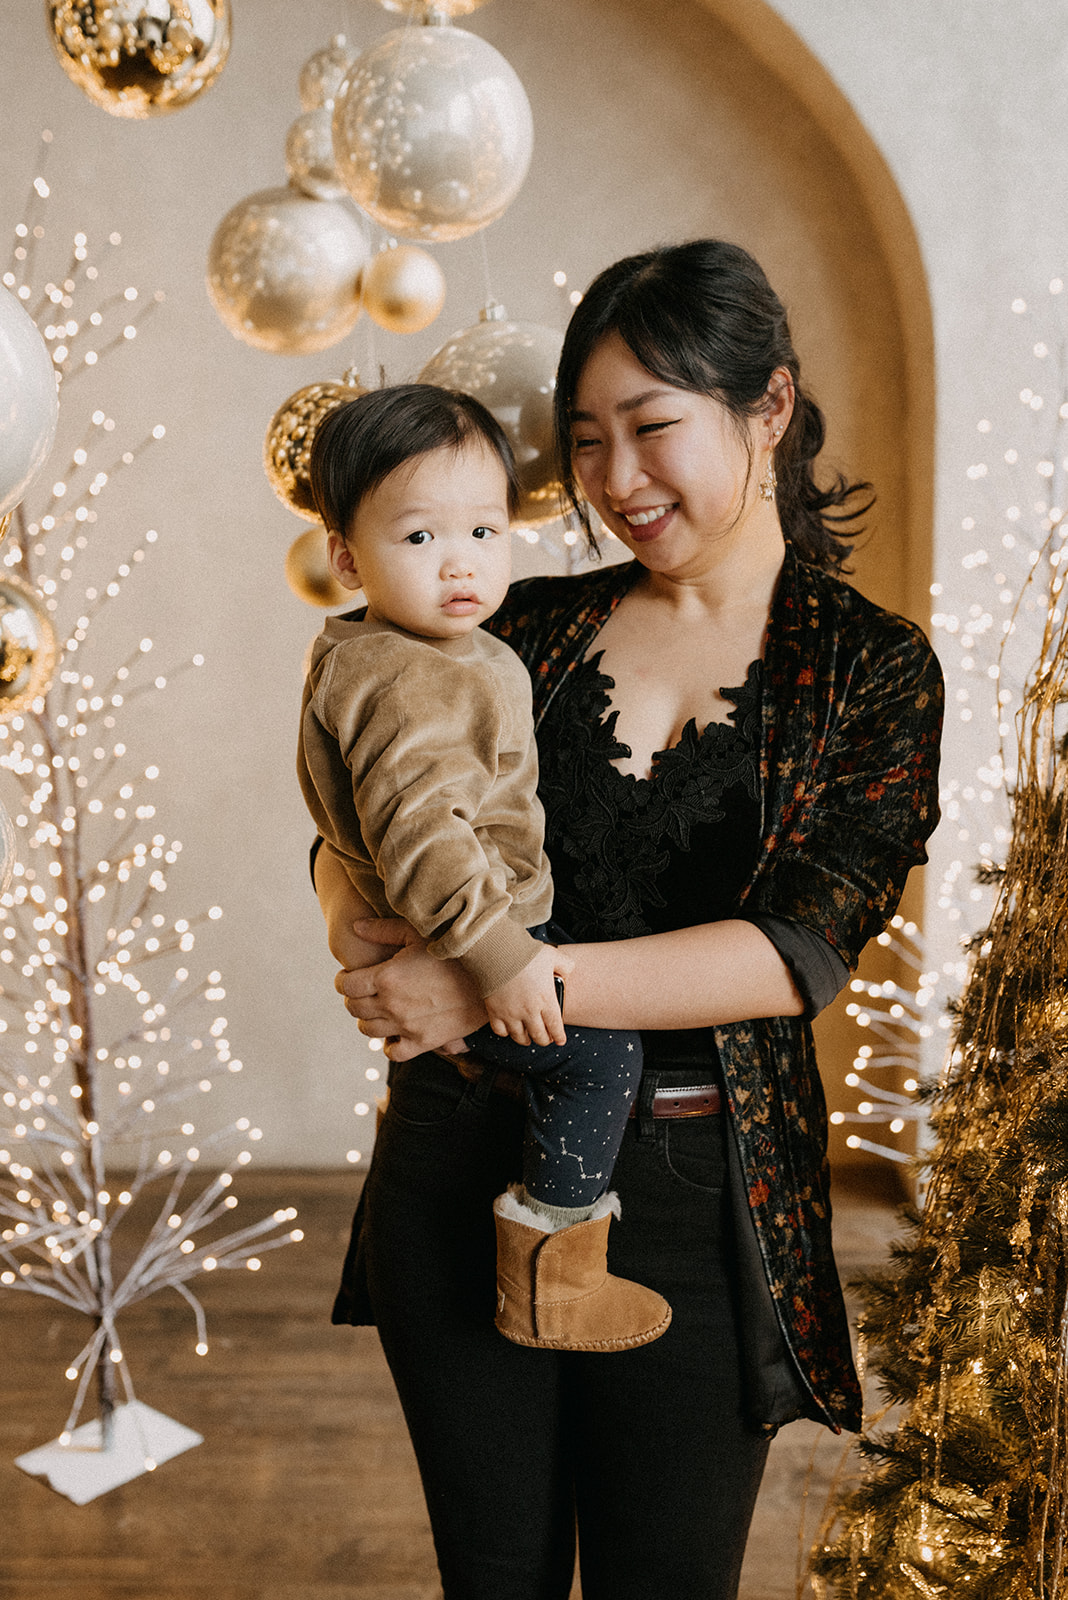 Mommy and son Xmas photo in a gold shiny holiday set up in Toronto